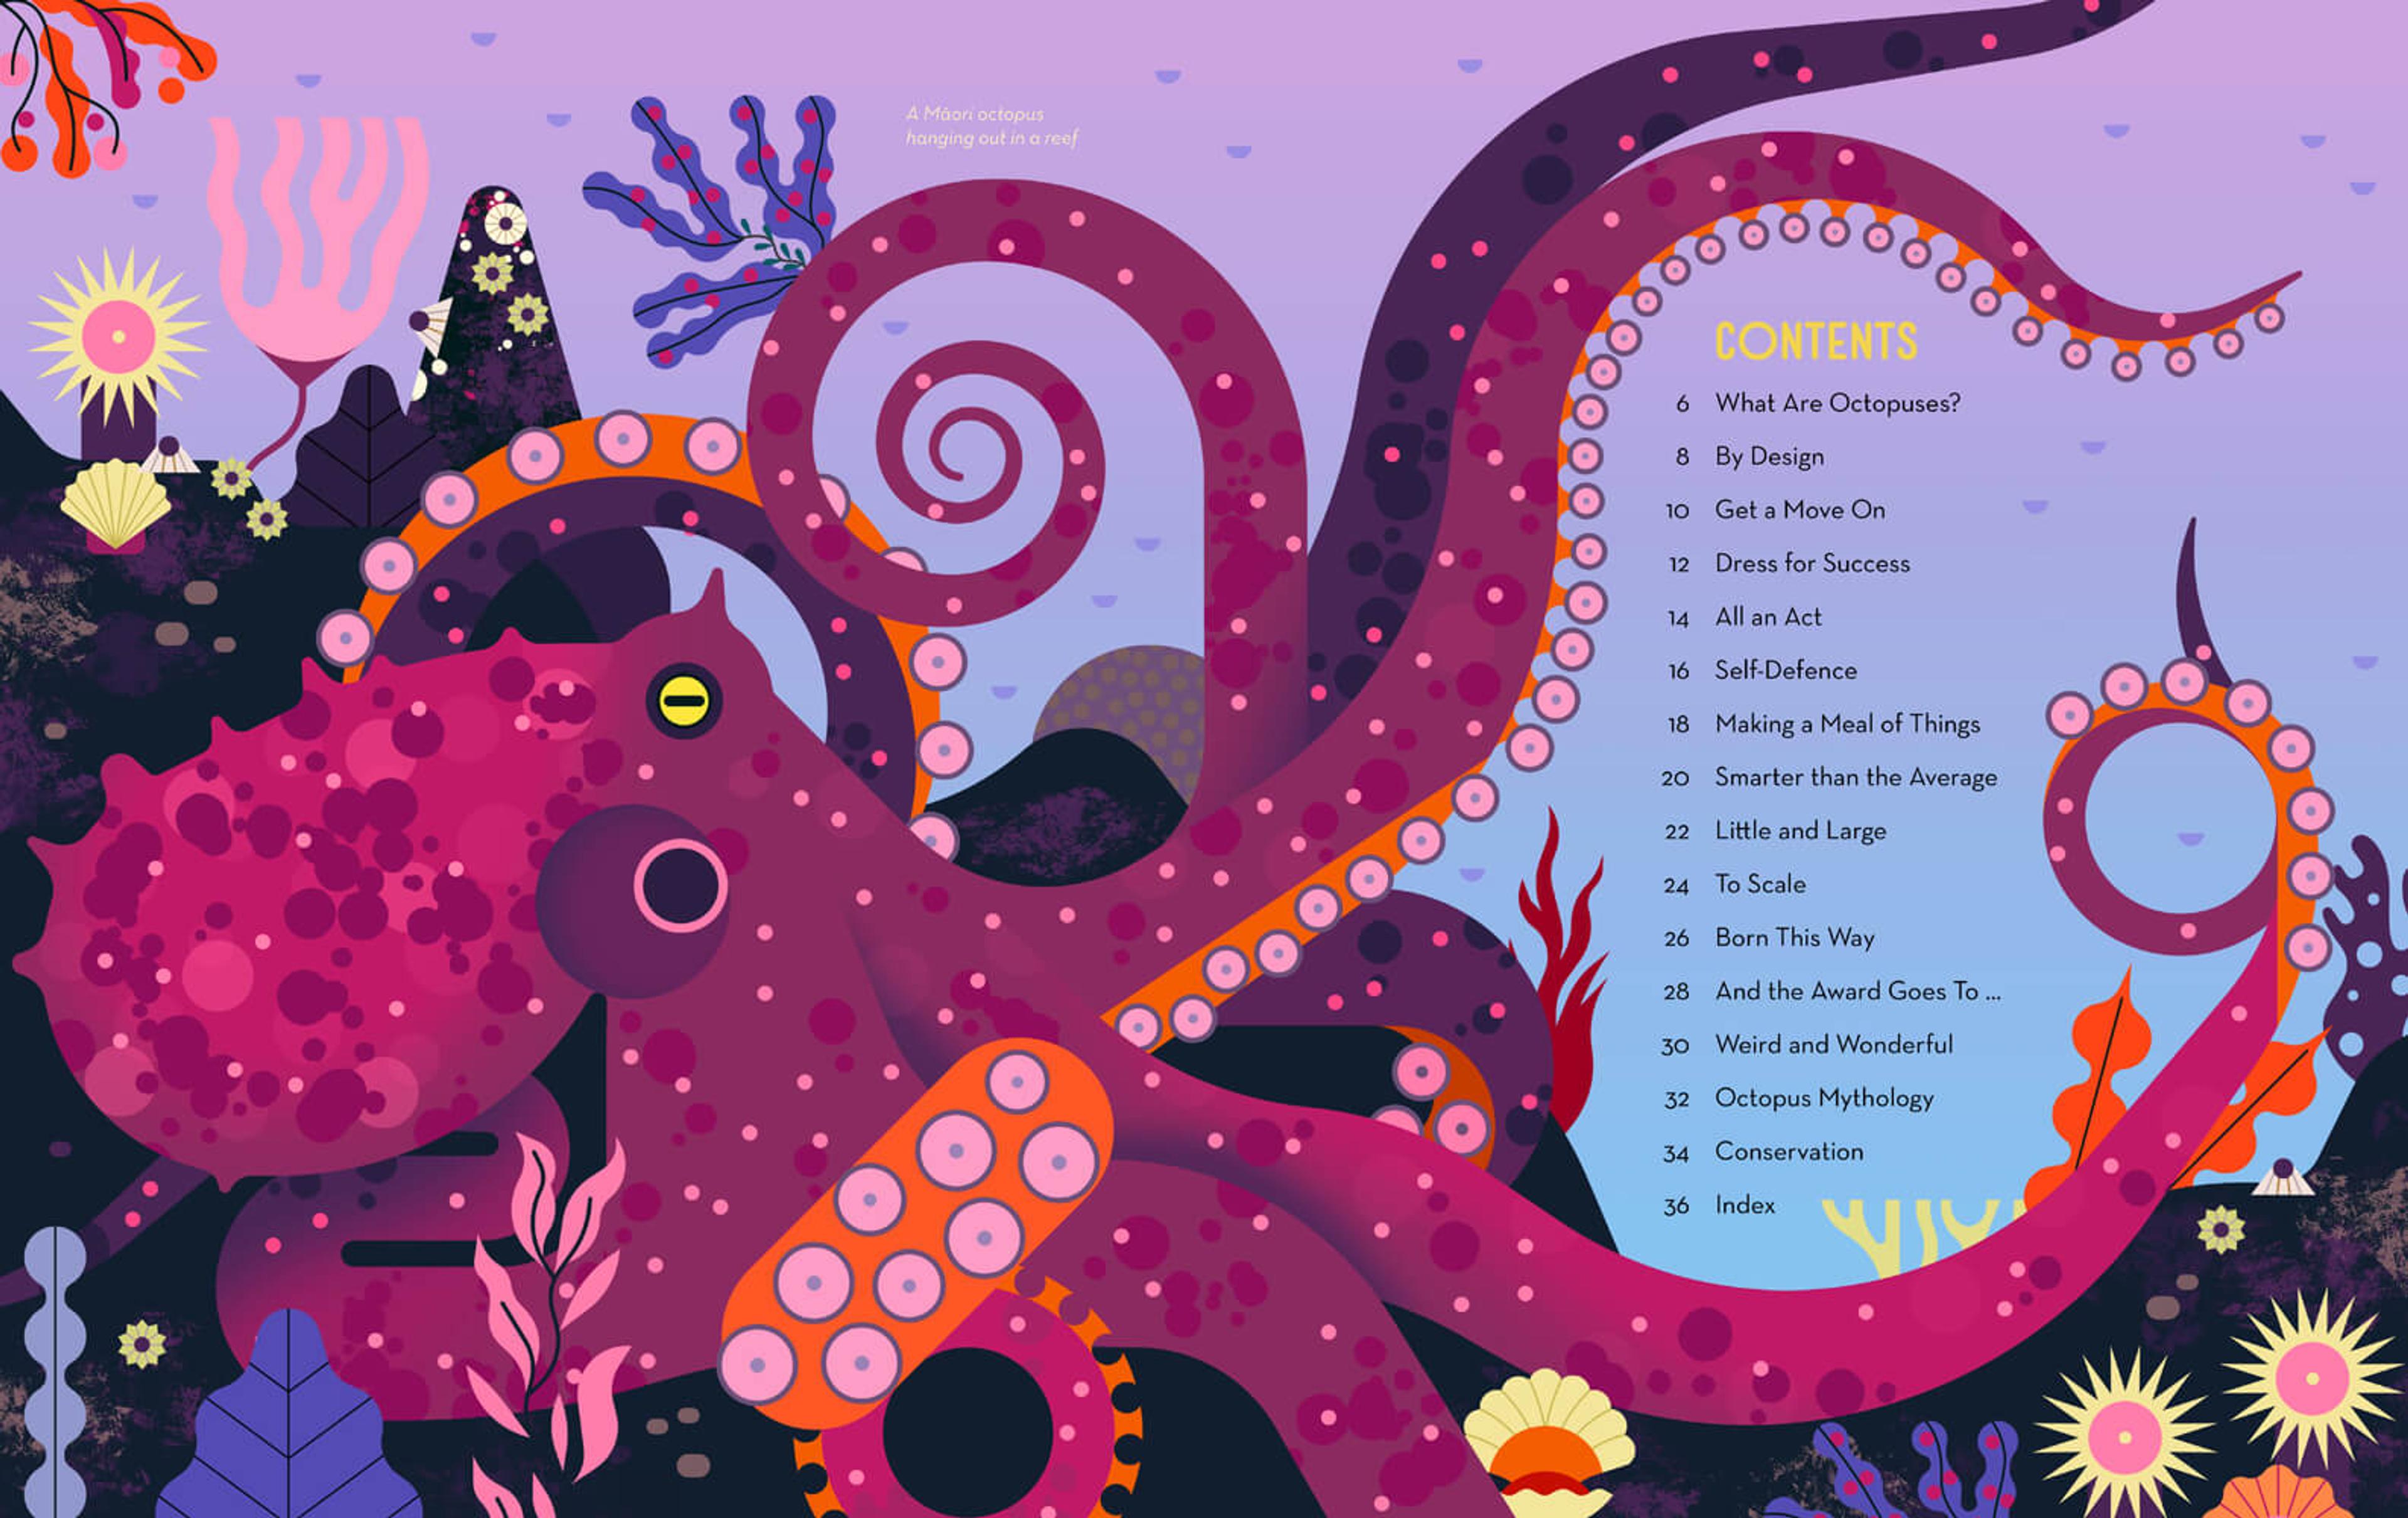 Content page from Obsessive about Octopuses featuring a colourful image of an octopus against a blue backdrop, next to the contents list